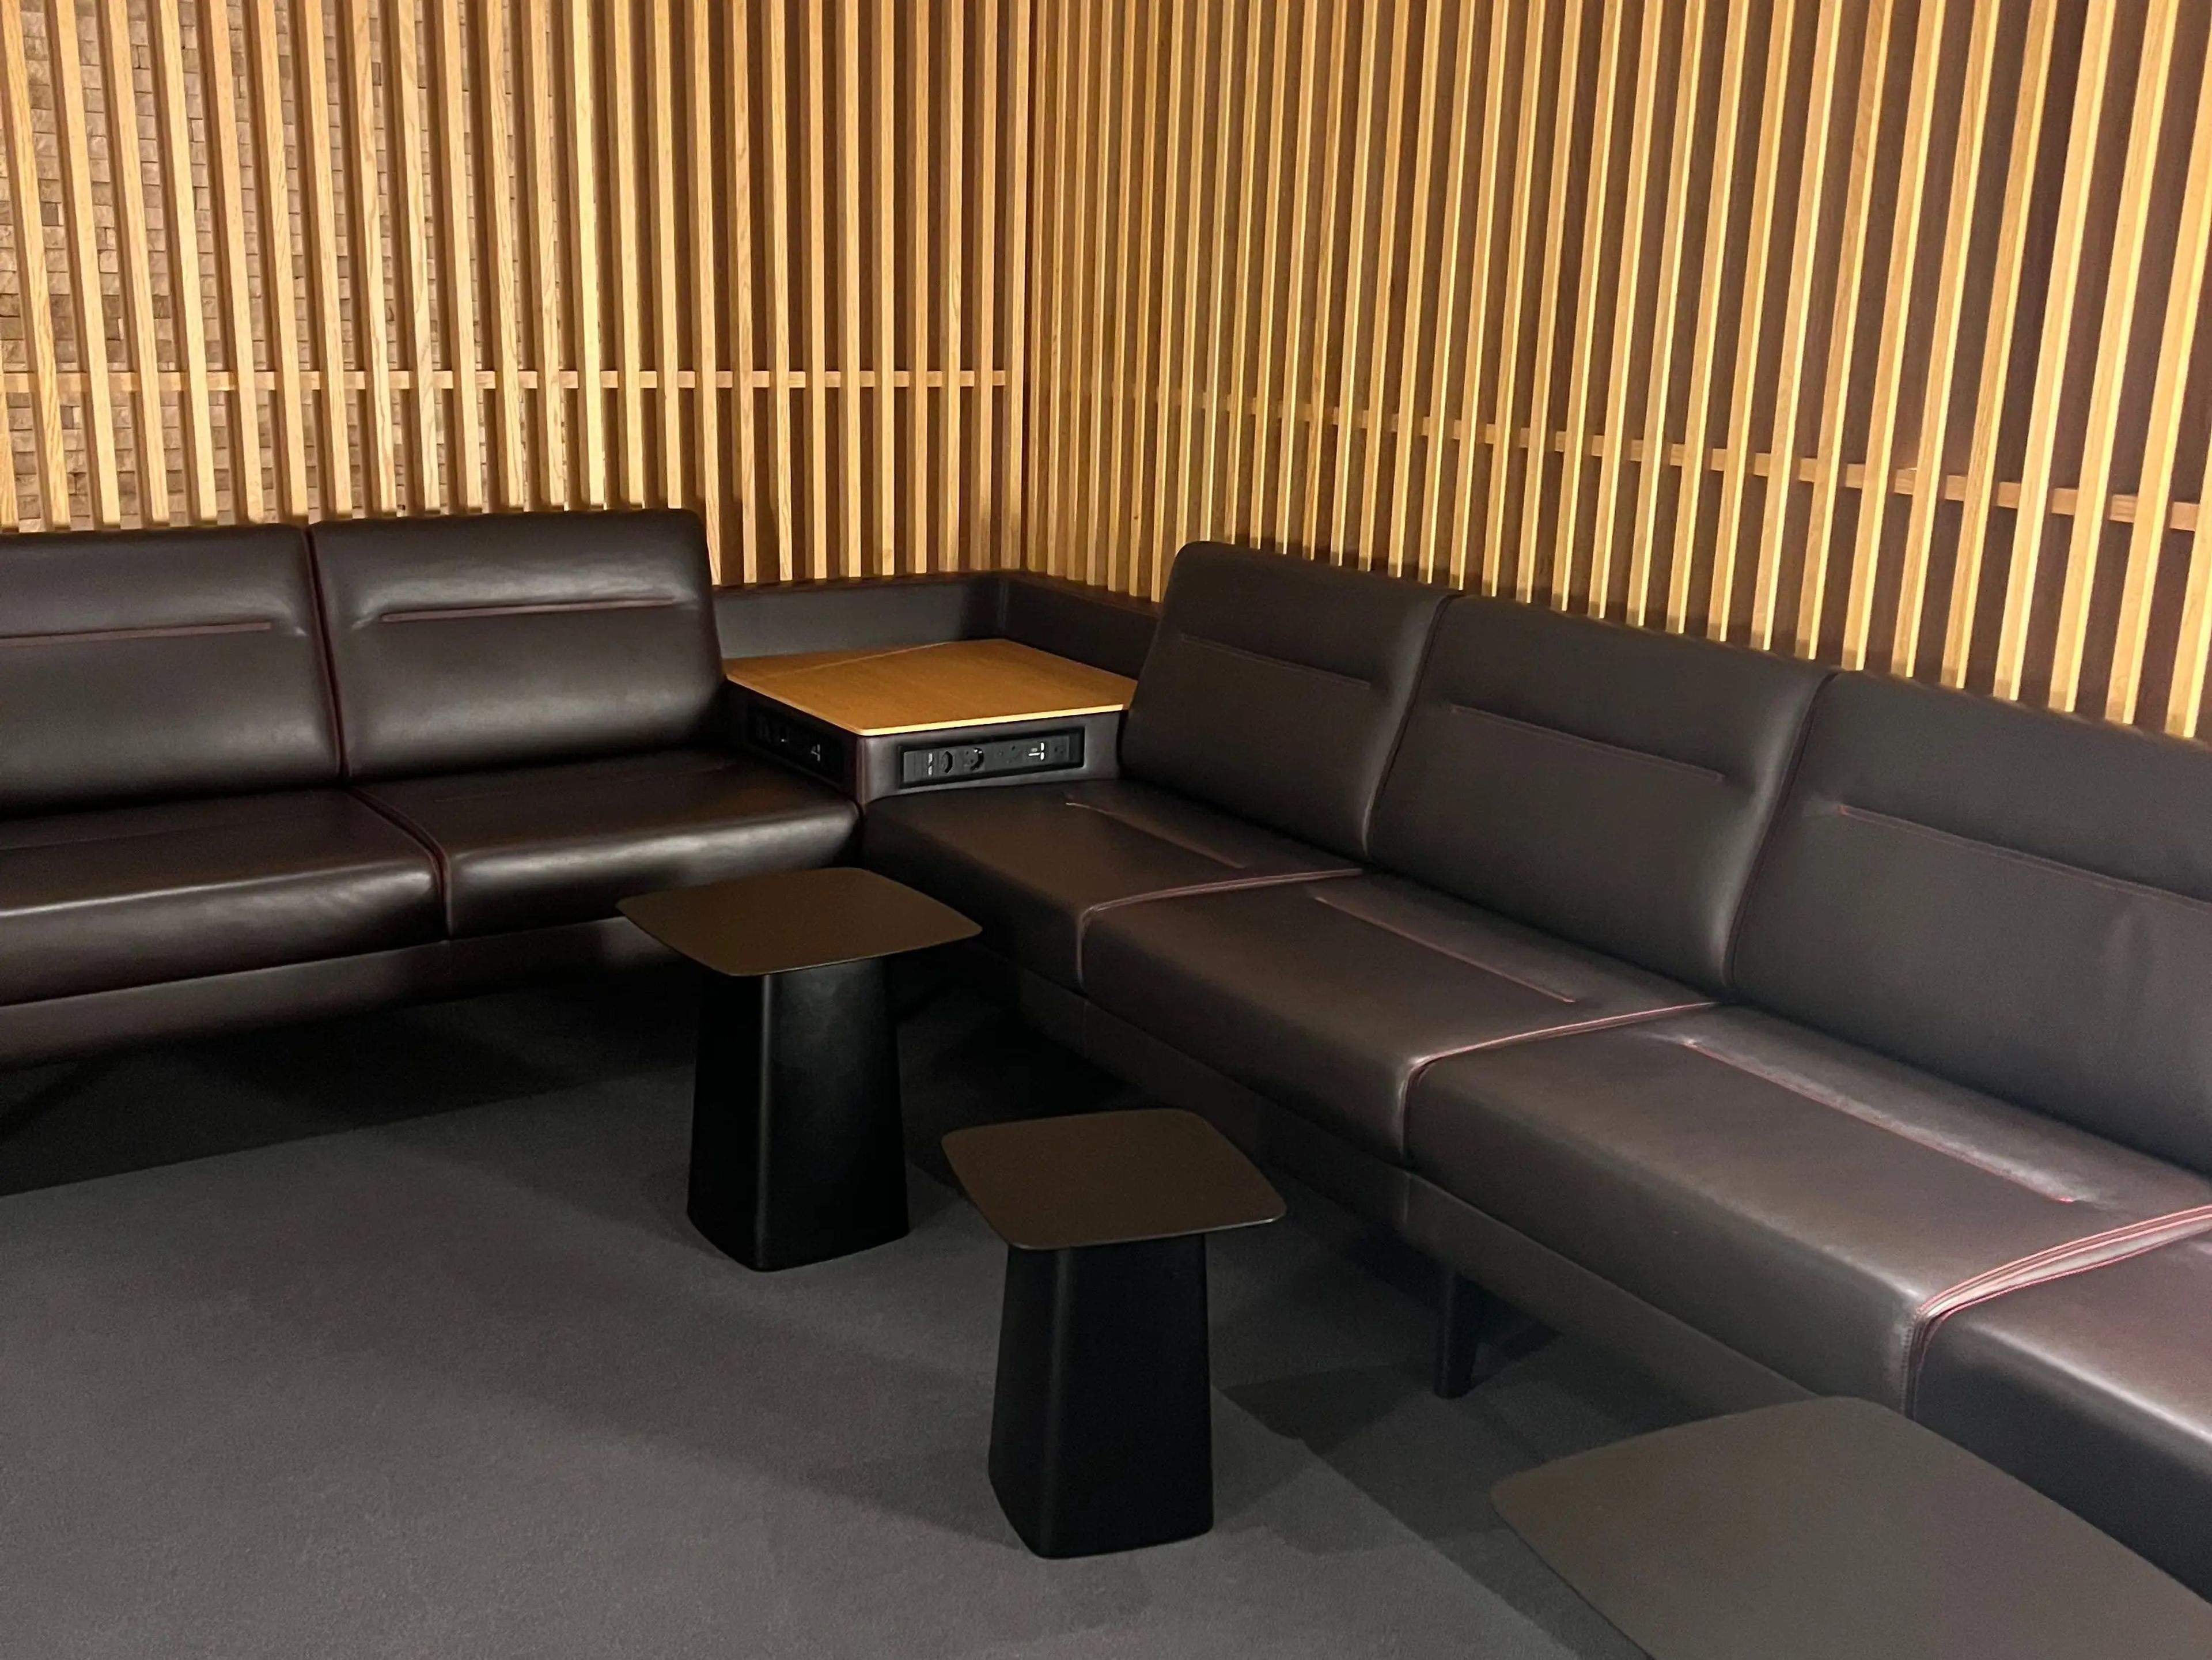 an airport lounge with sleek black couches, small tables, and a wood panel wall